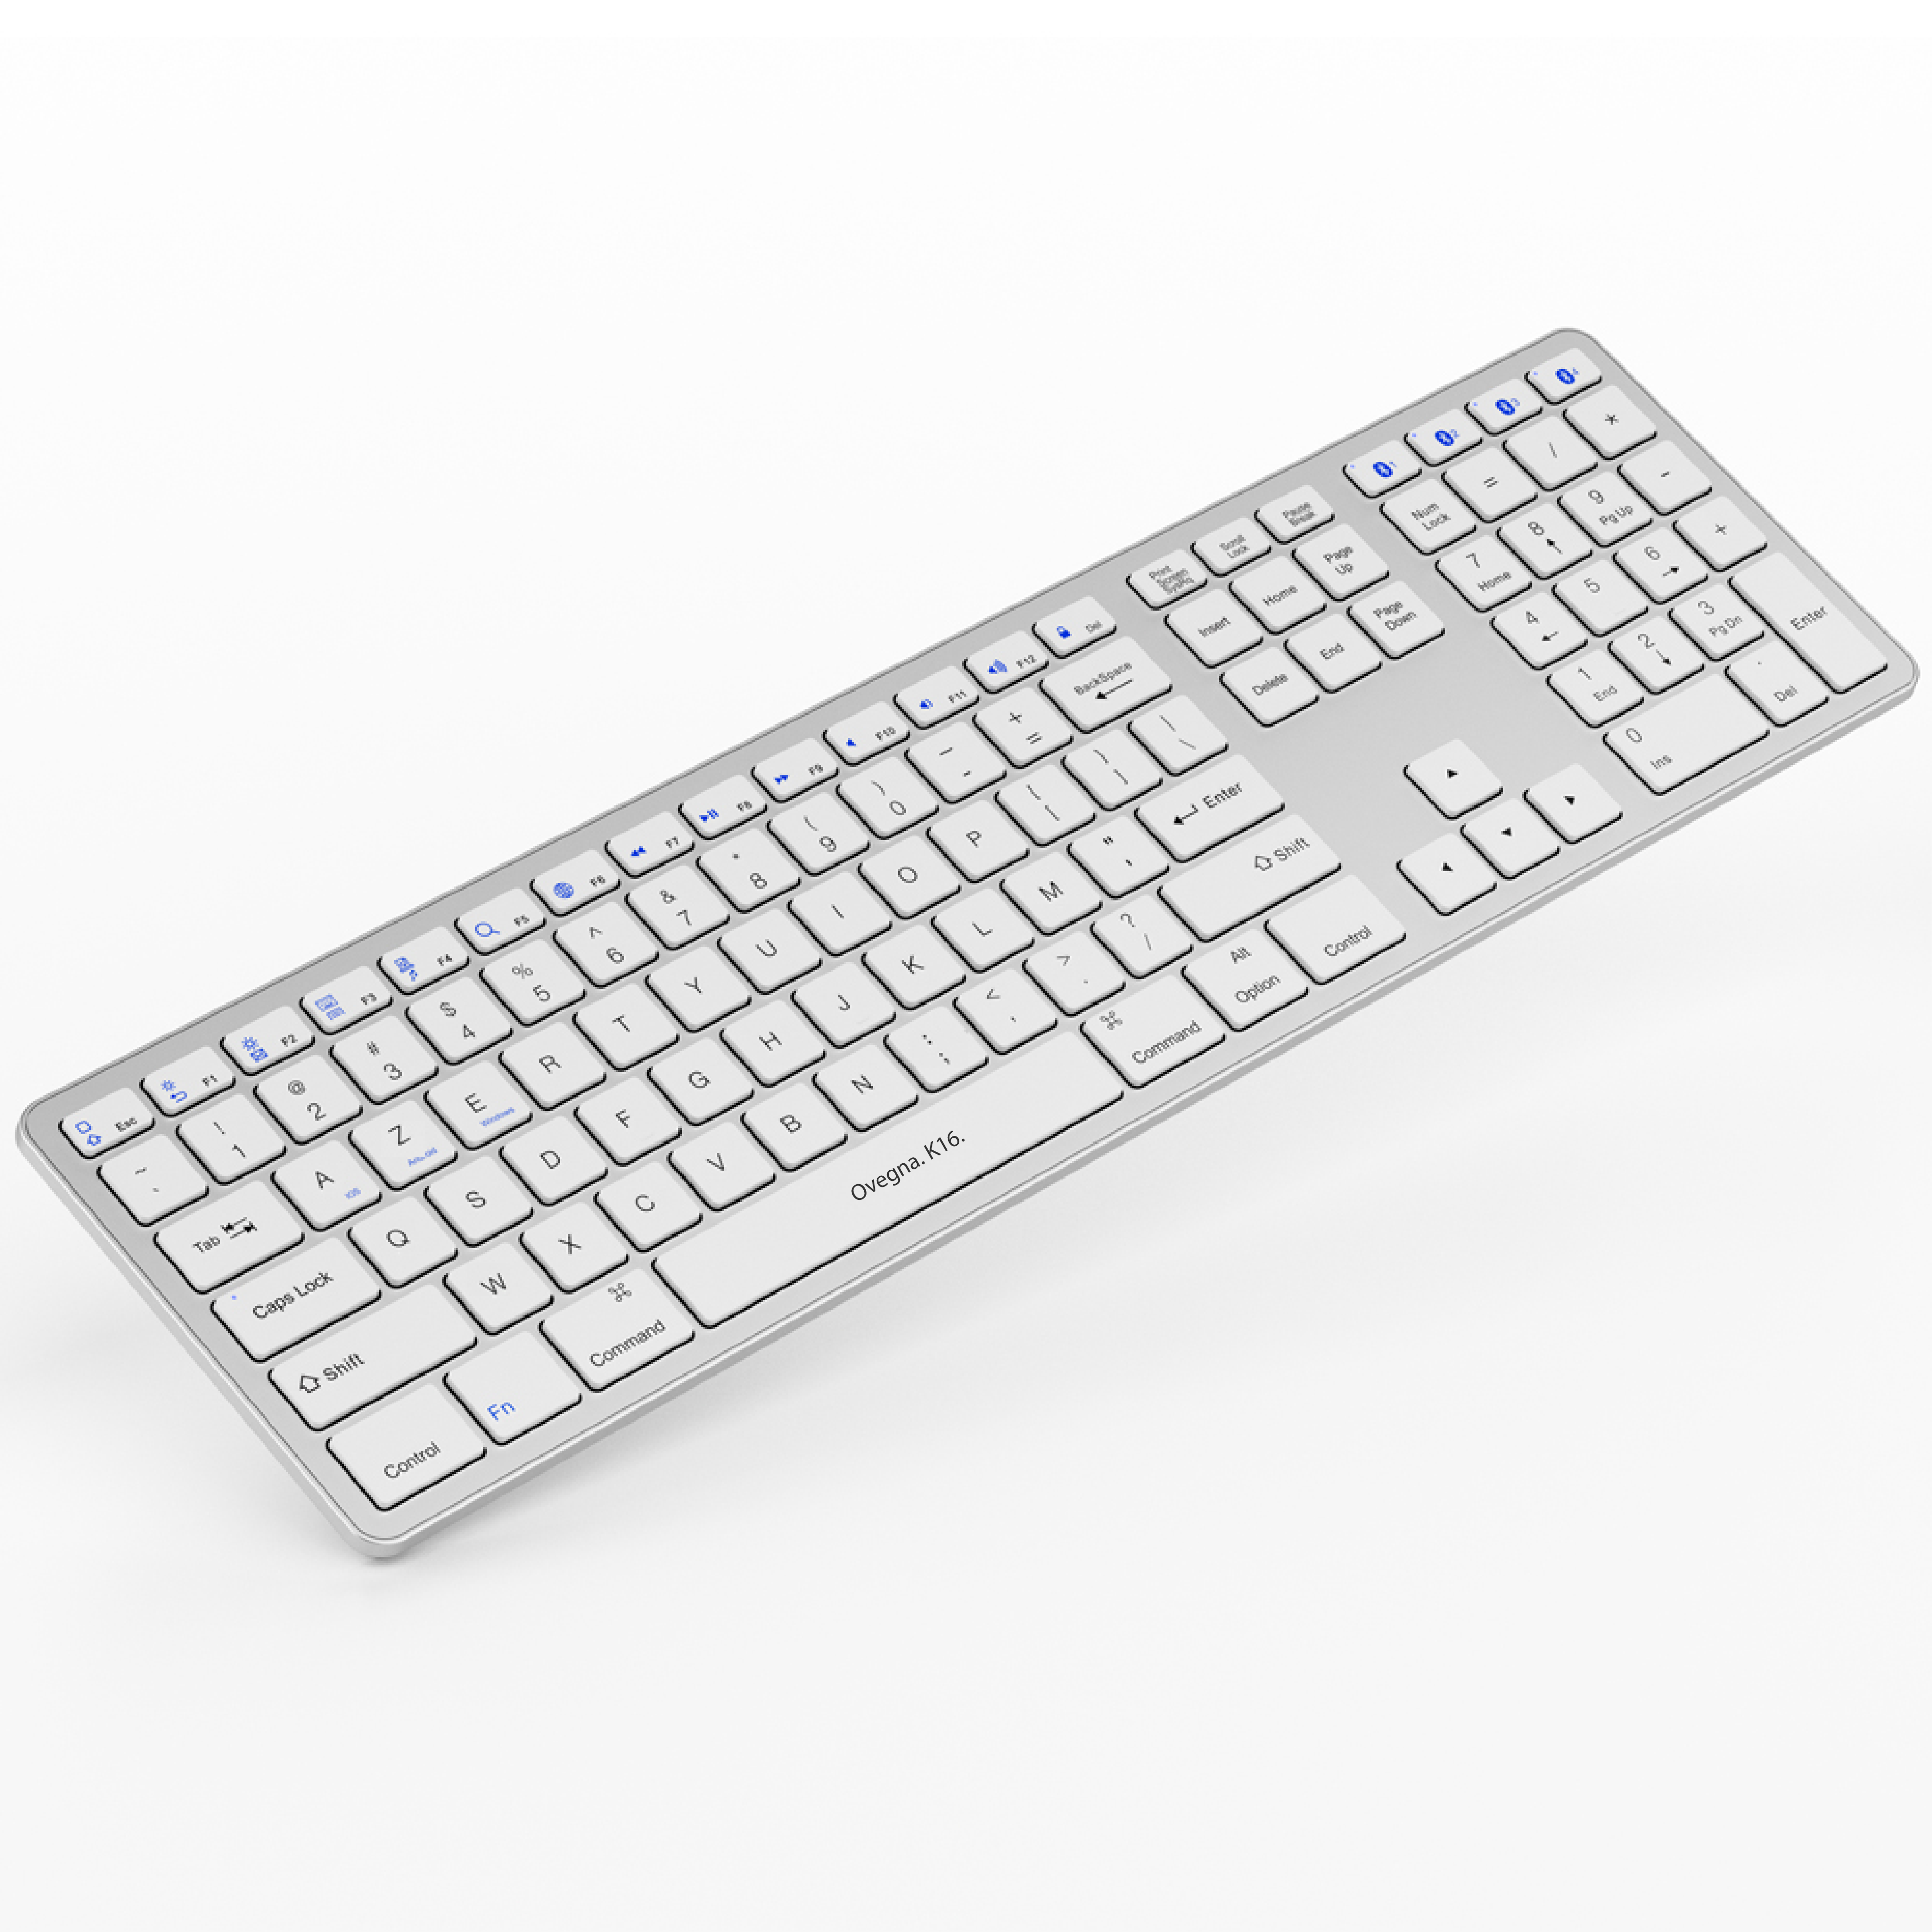 Ovegna K16: Keyboard AZERTY Ultra Thin Keyboard, 4 in 1 (Supports 4 Bluetooth devices simultaneously), Wireless, for Smartphone, Tablet, Huawei, iPhone, iPad, SmartTV, Computer, Android, iOS, Windows